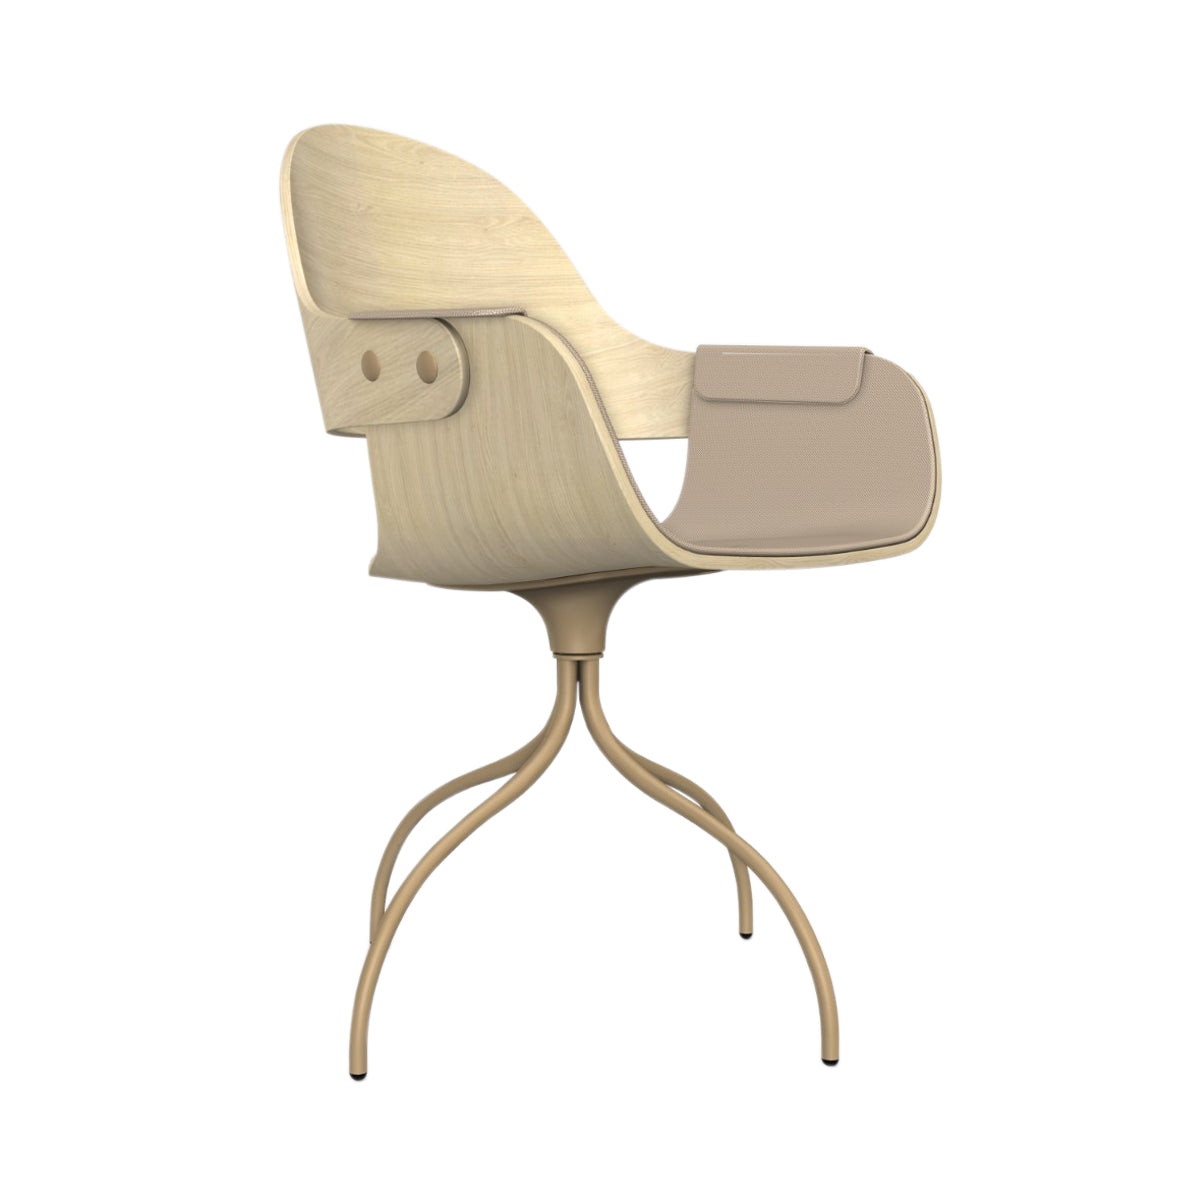 Showtime Nude Chair with Swivel Base: Interior Seat + Armrest Upholstered + Natural Ash + Beige